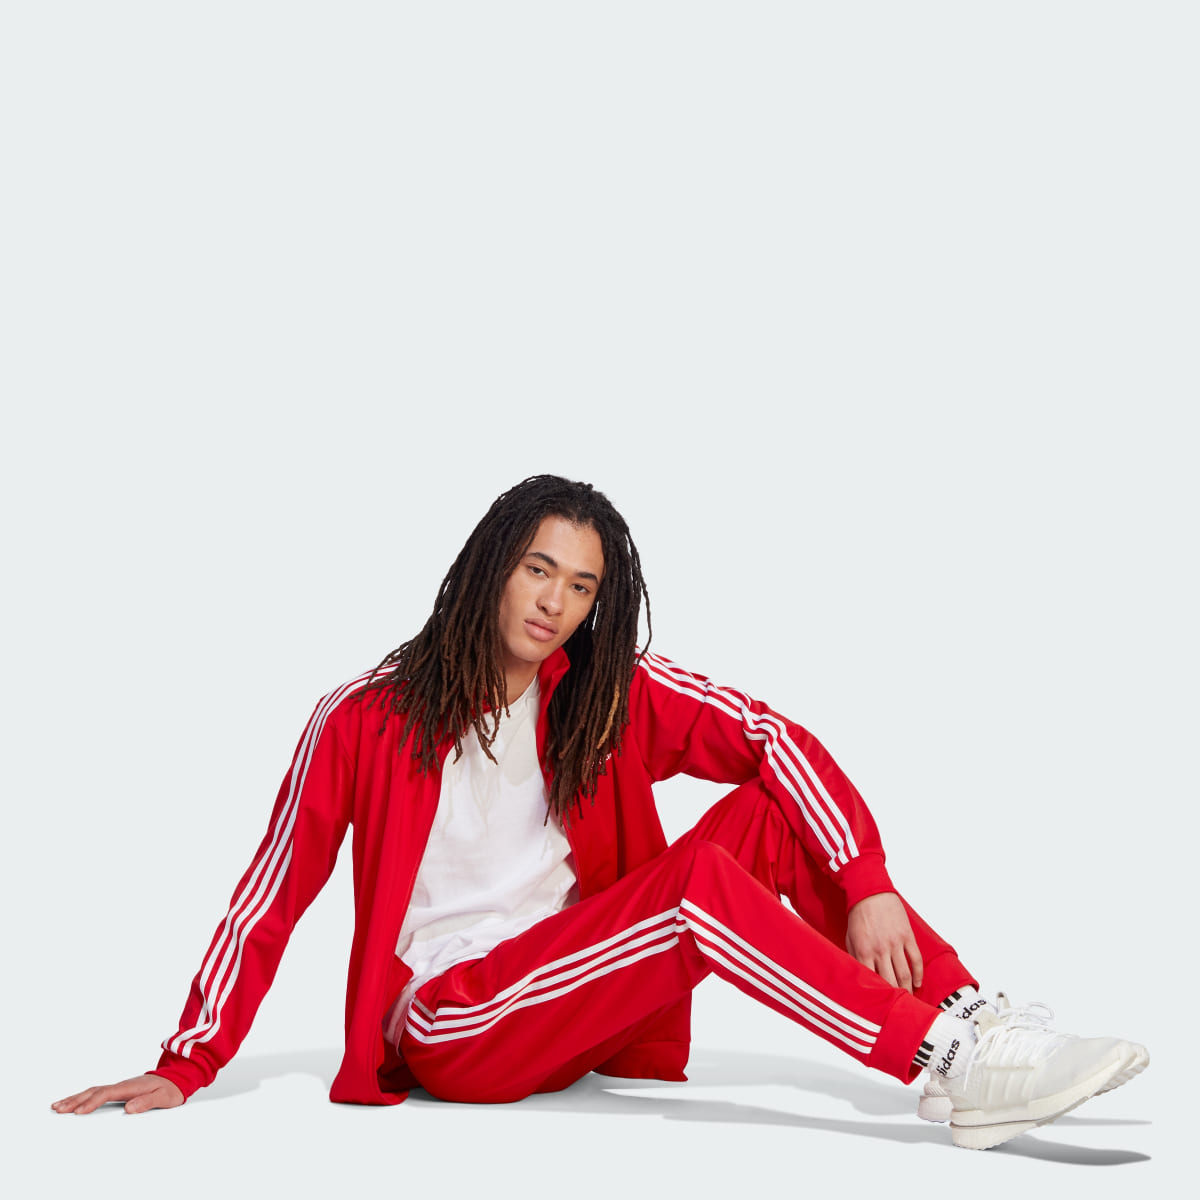 Adidas Basic 3-Stripes Tricot Track Suit. 4